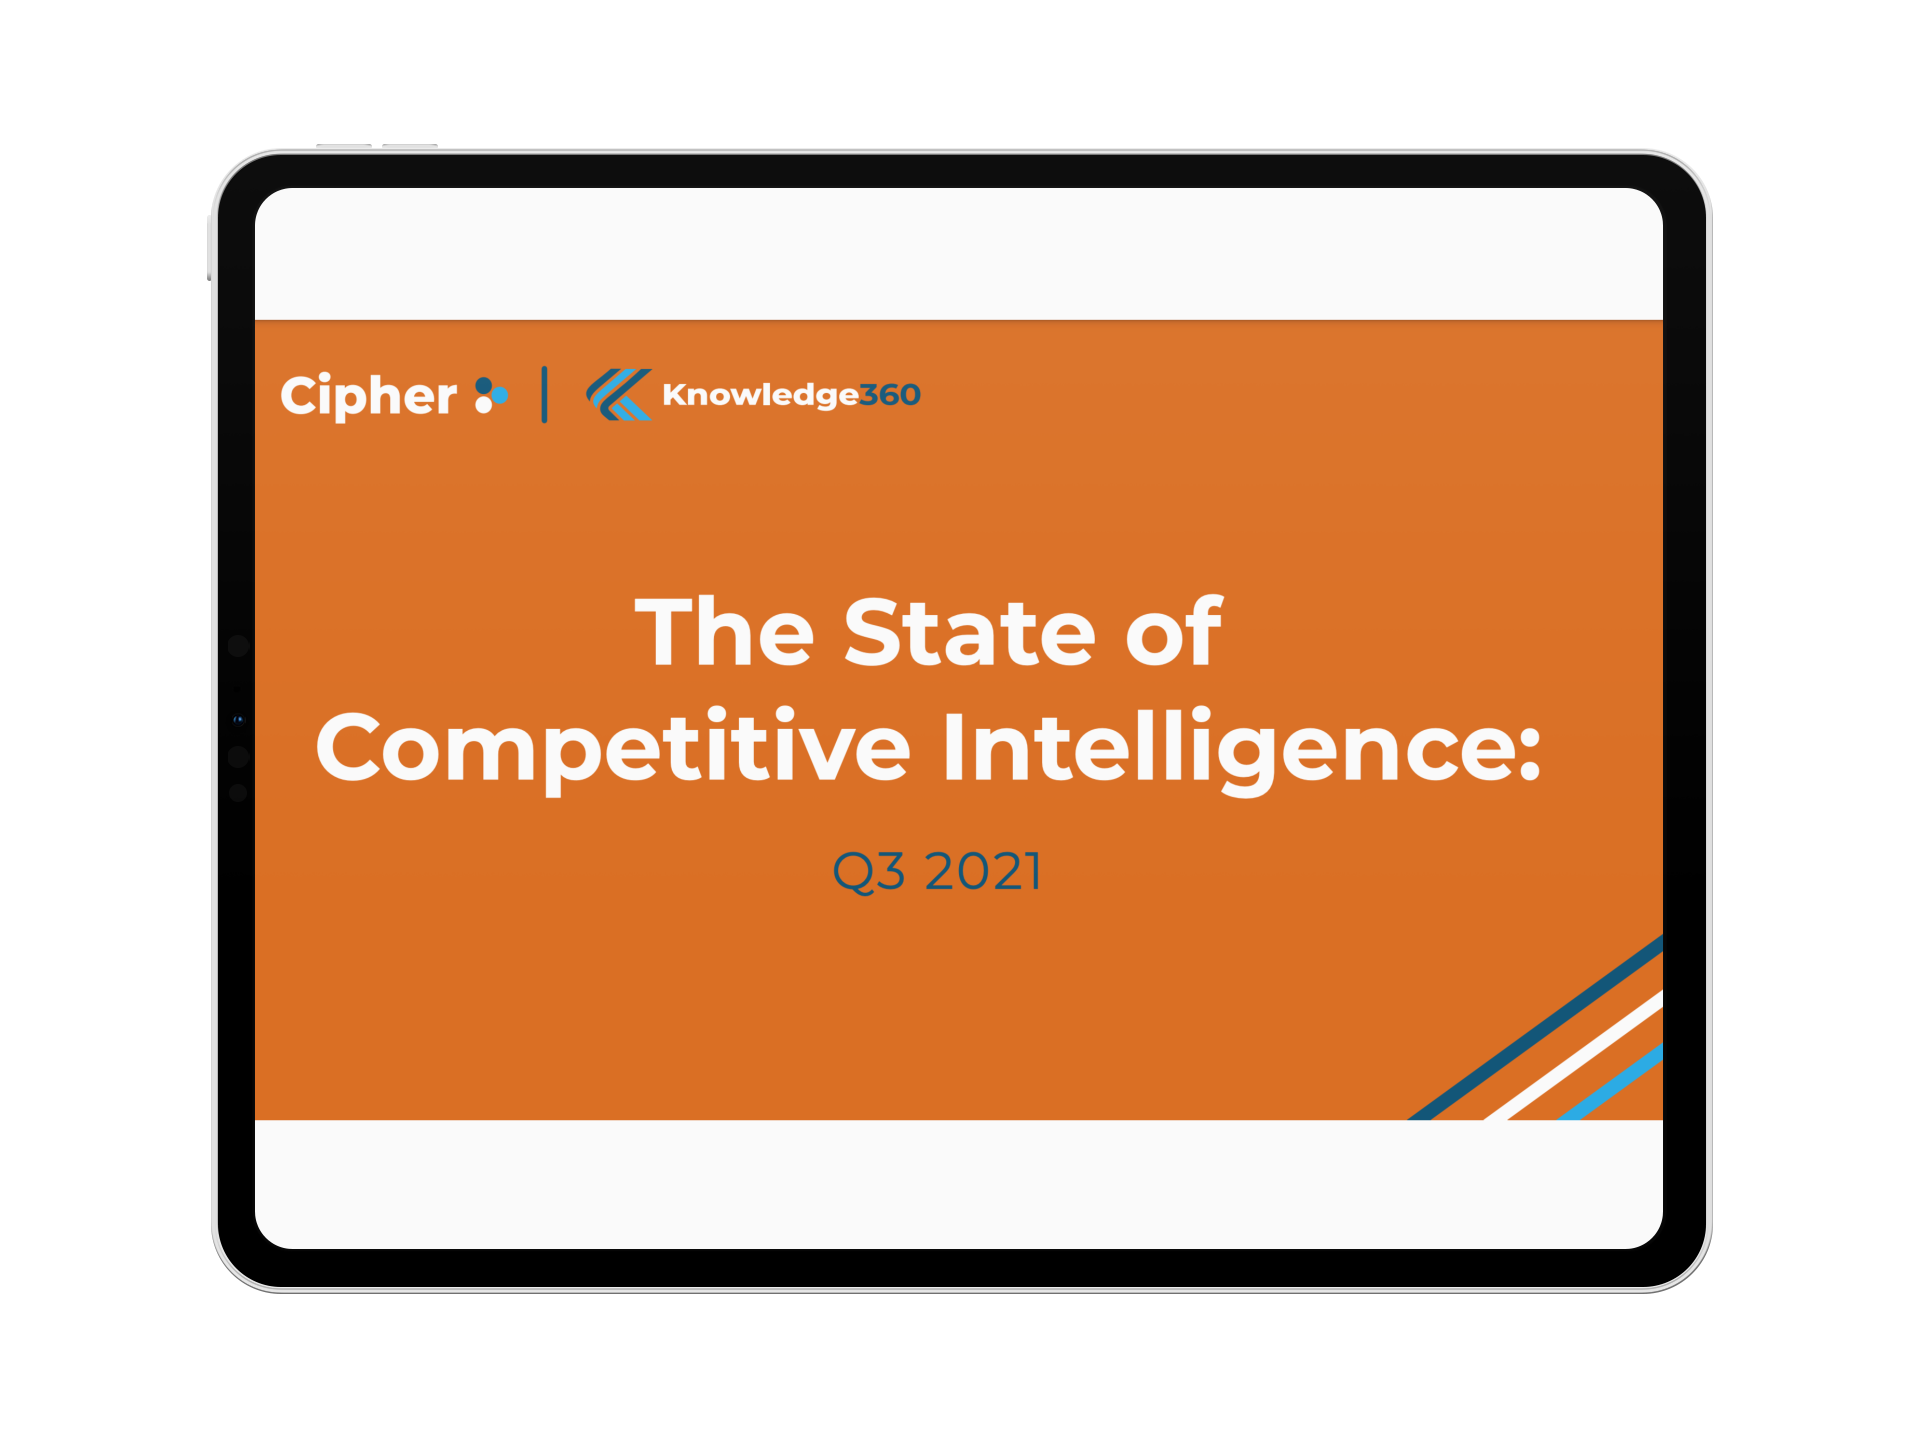 The State of Competitive Intelligence: Q3 2021